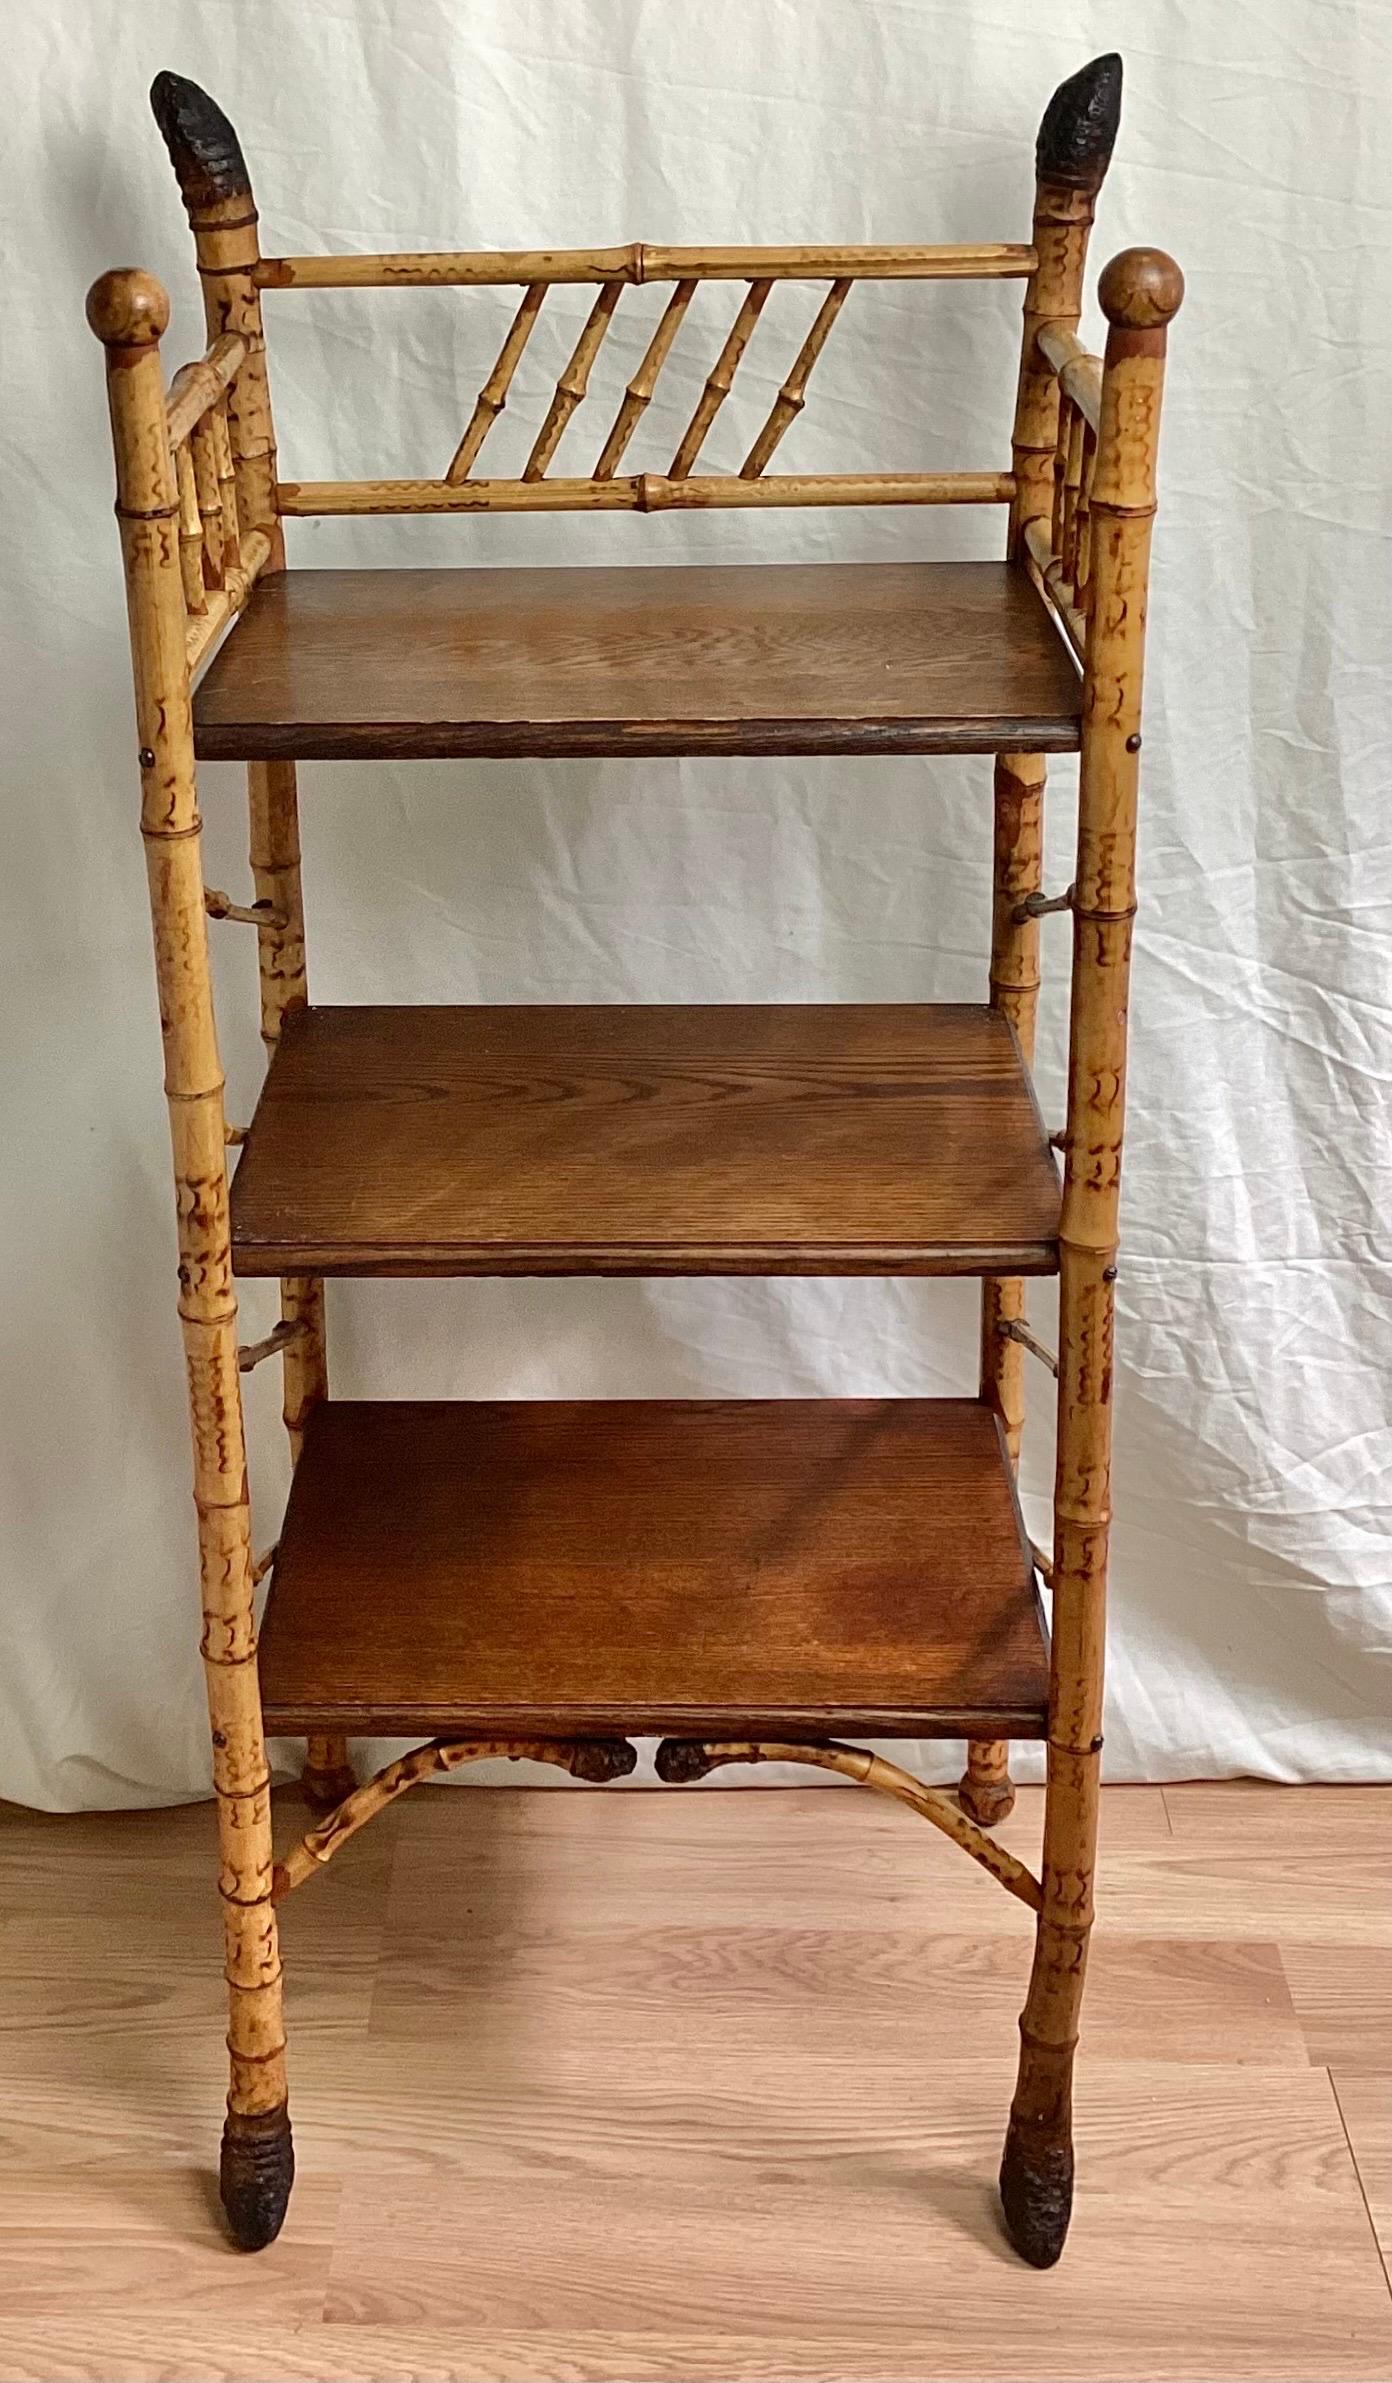 English Victorian Bamboo Étagère with nice oak shelves. One of the better ones I have had over the years. Nice size and nice details on the feet and top. I found some small filled holes. It may have had more shelves originally.
Local pick-up and or